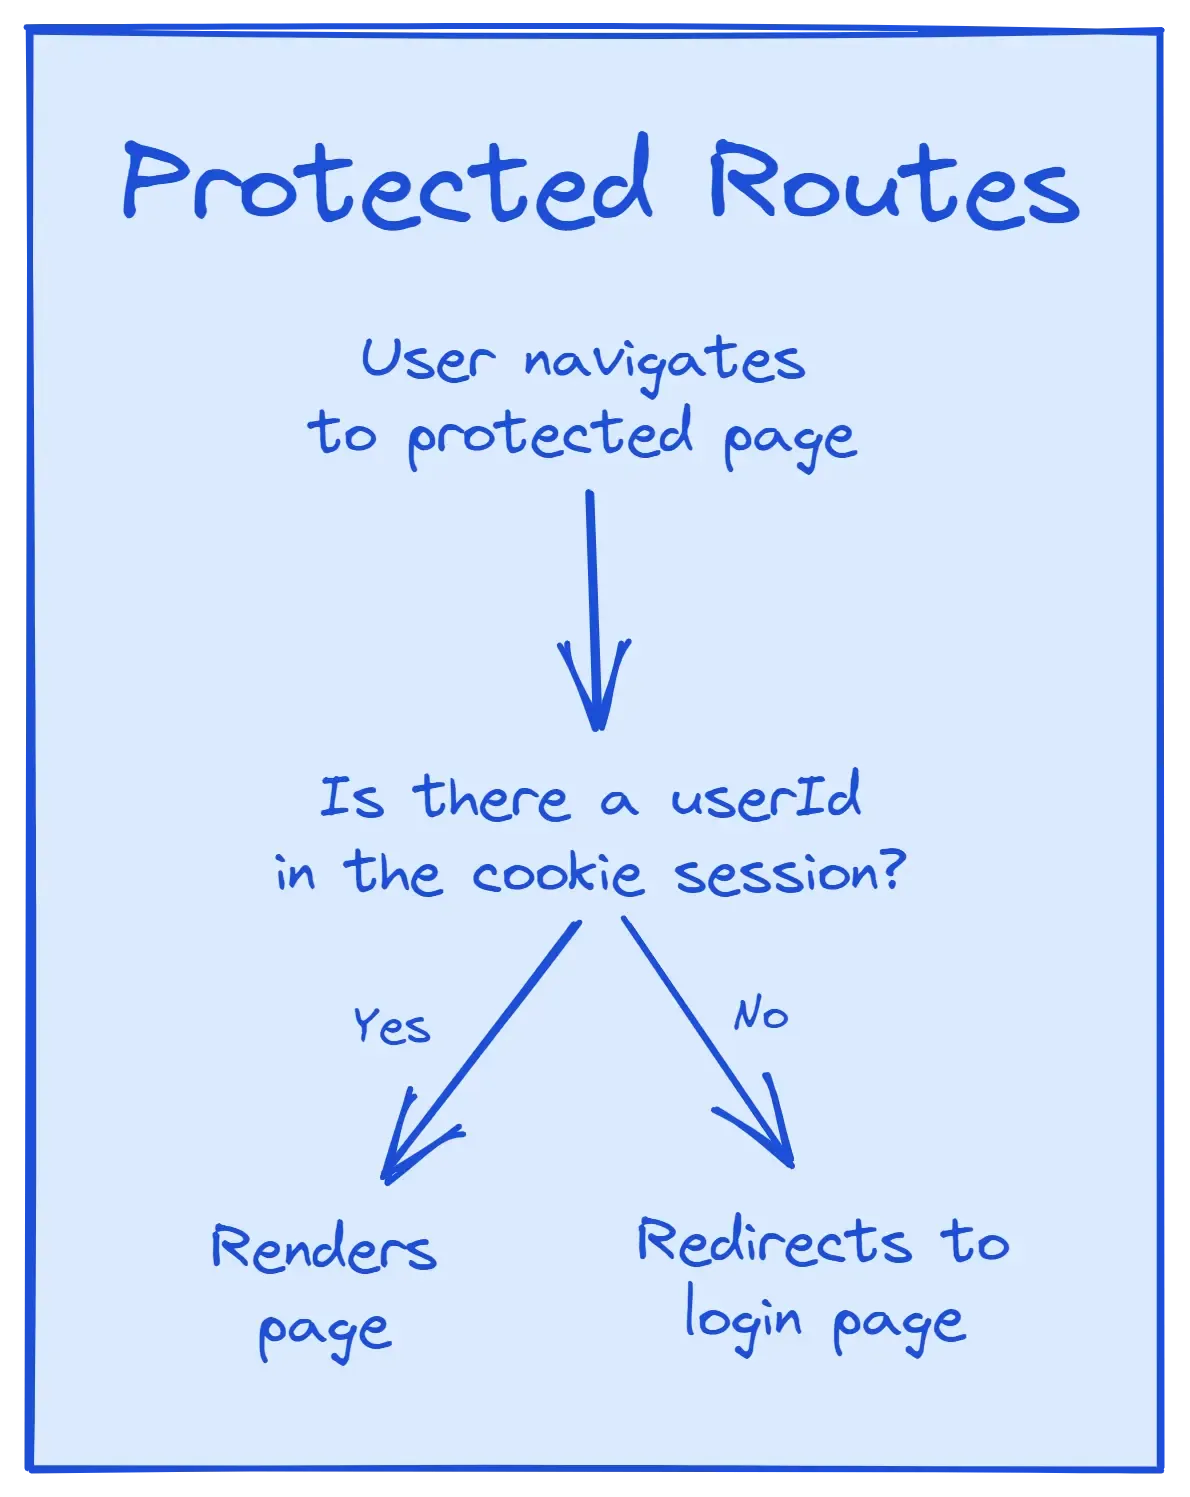 A flow chart showing a check for the userId in the cookie session. If it is present, we render the page. If not, we redirect to the login page.